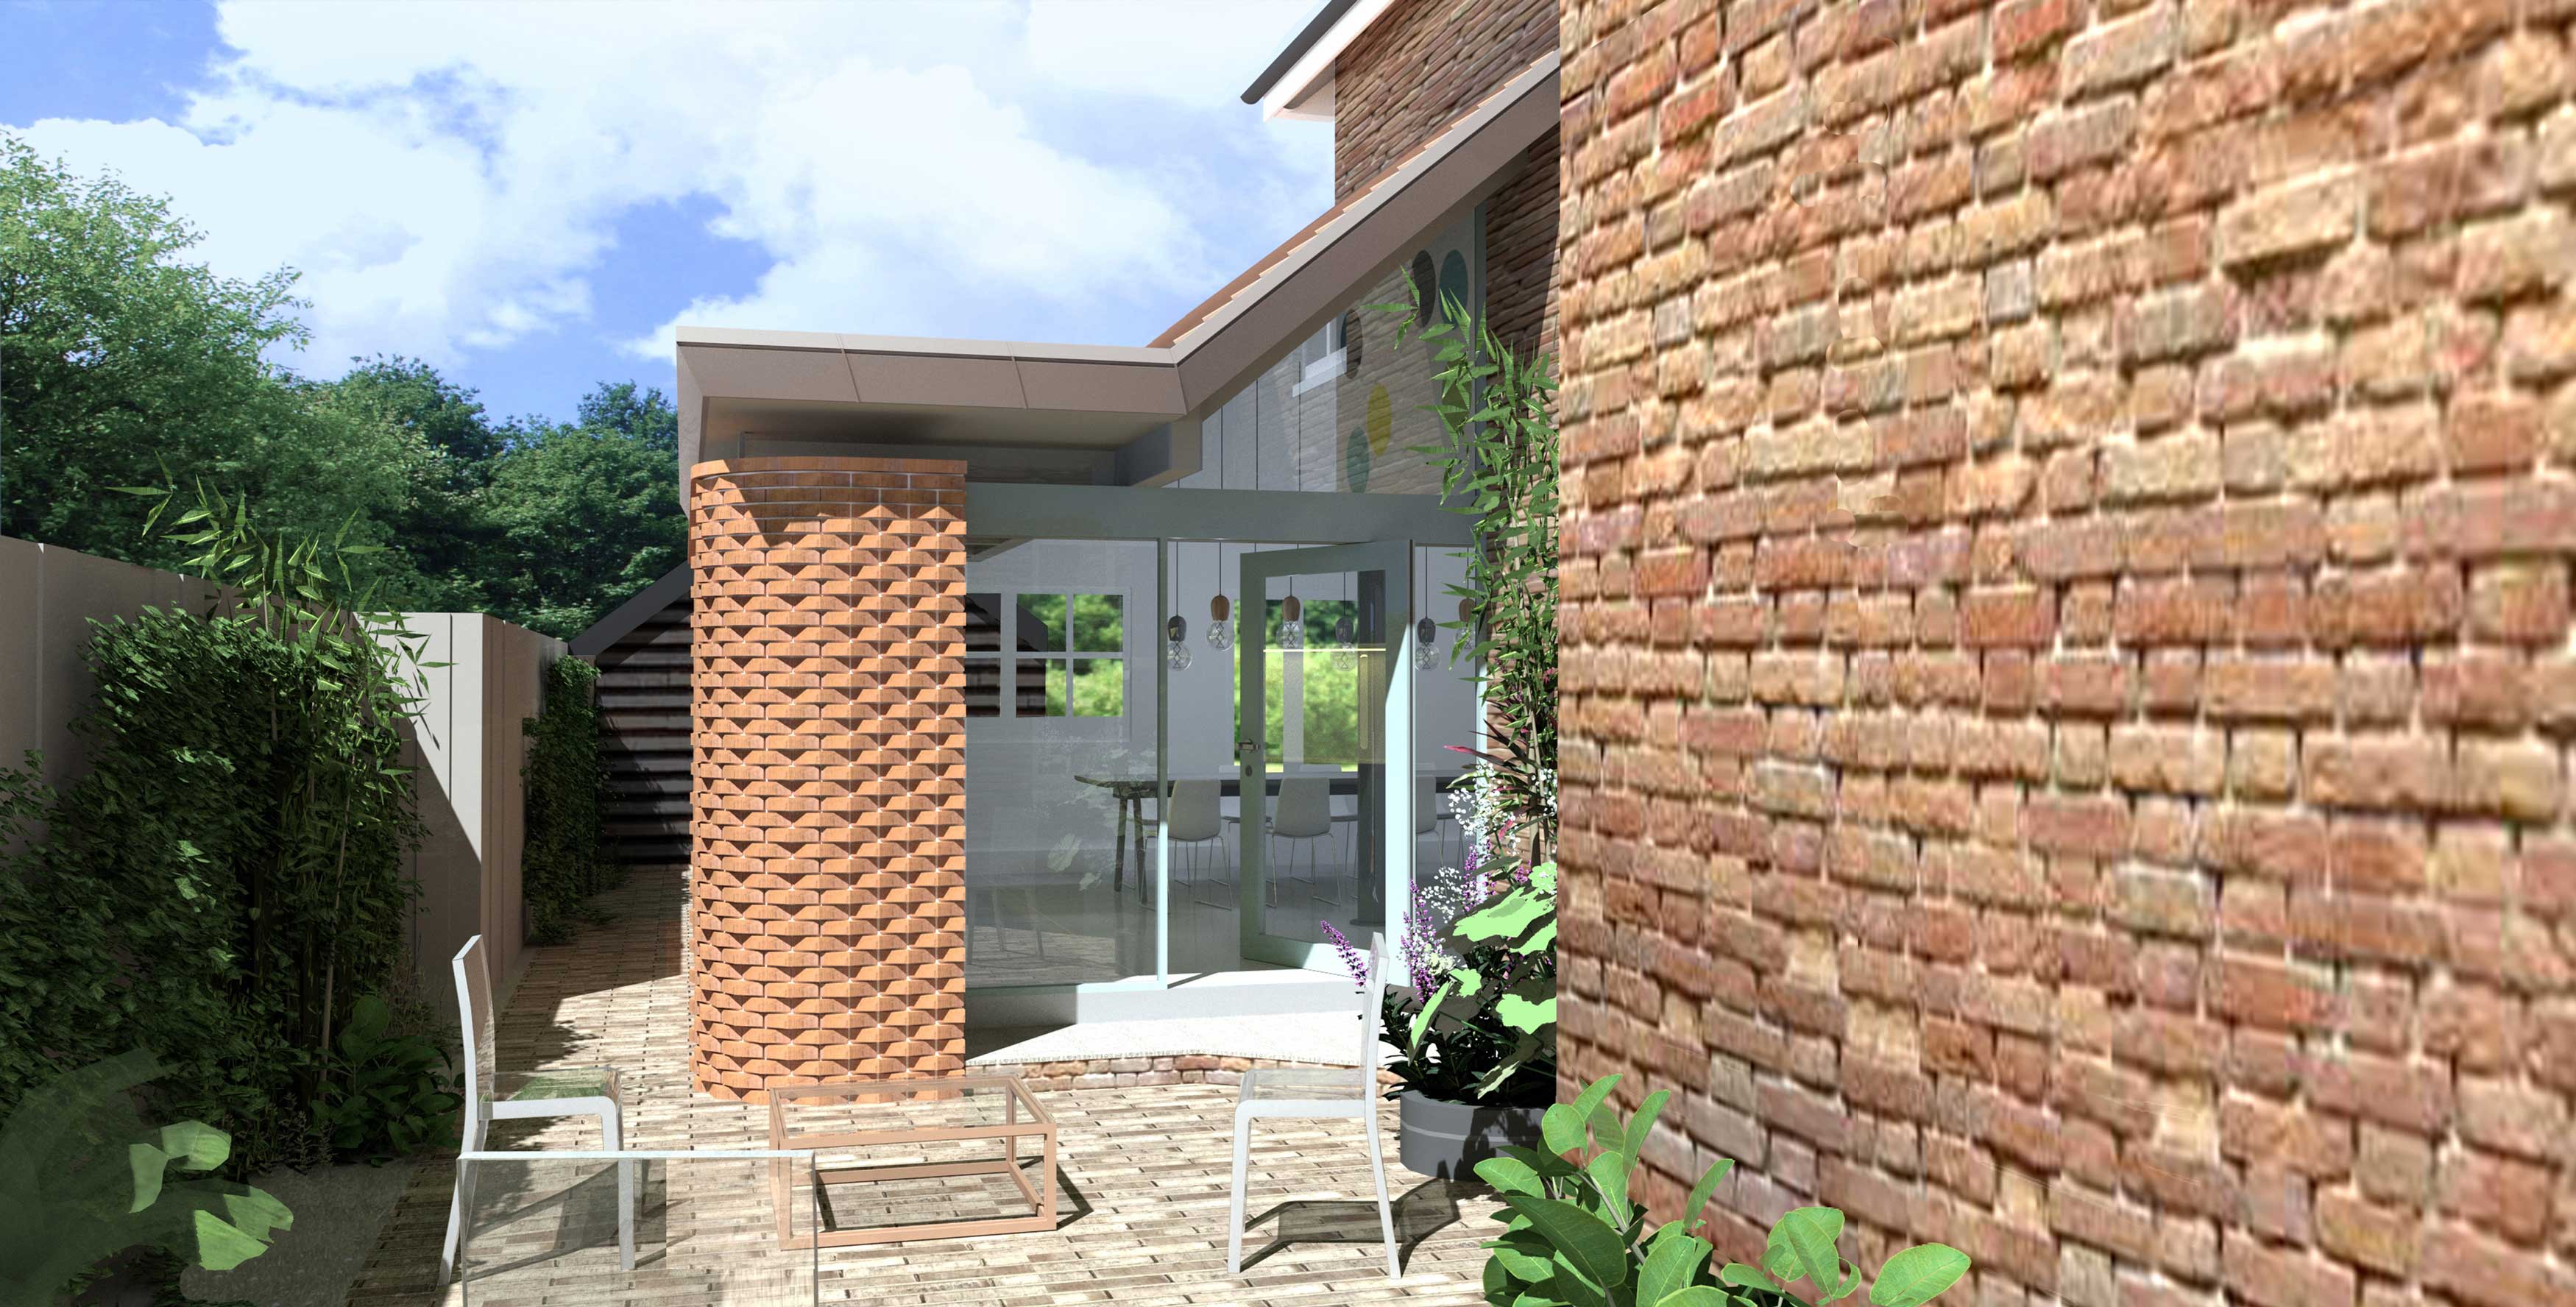 local architects in norwich area win planning permission for contemporary side extension